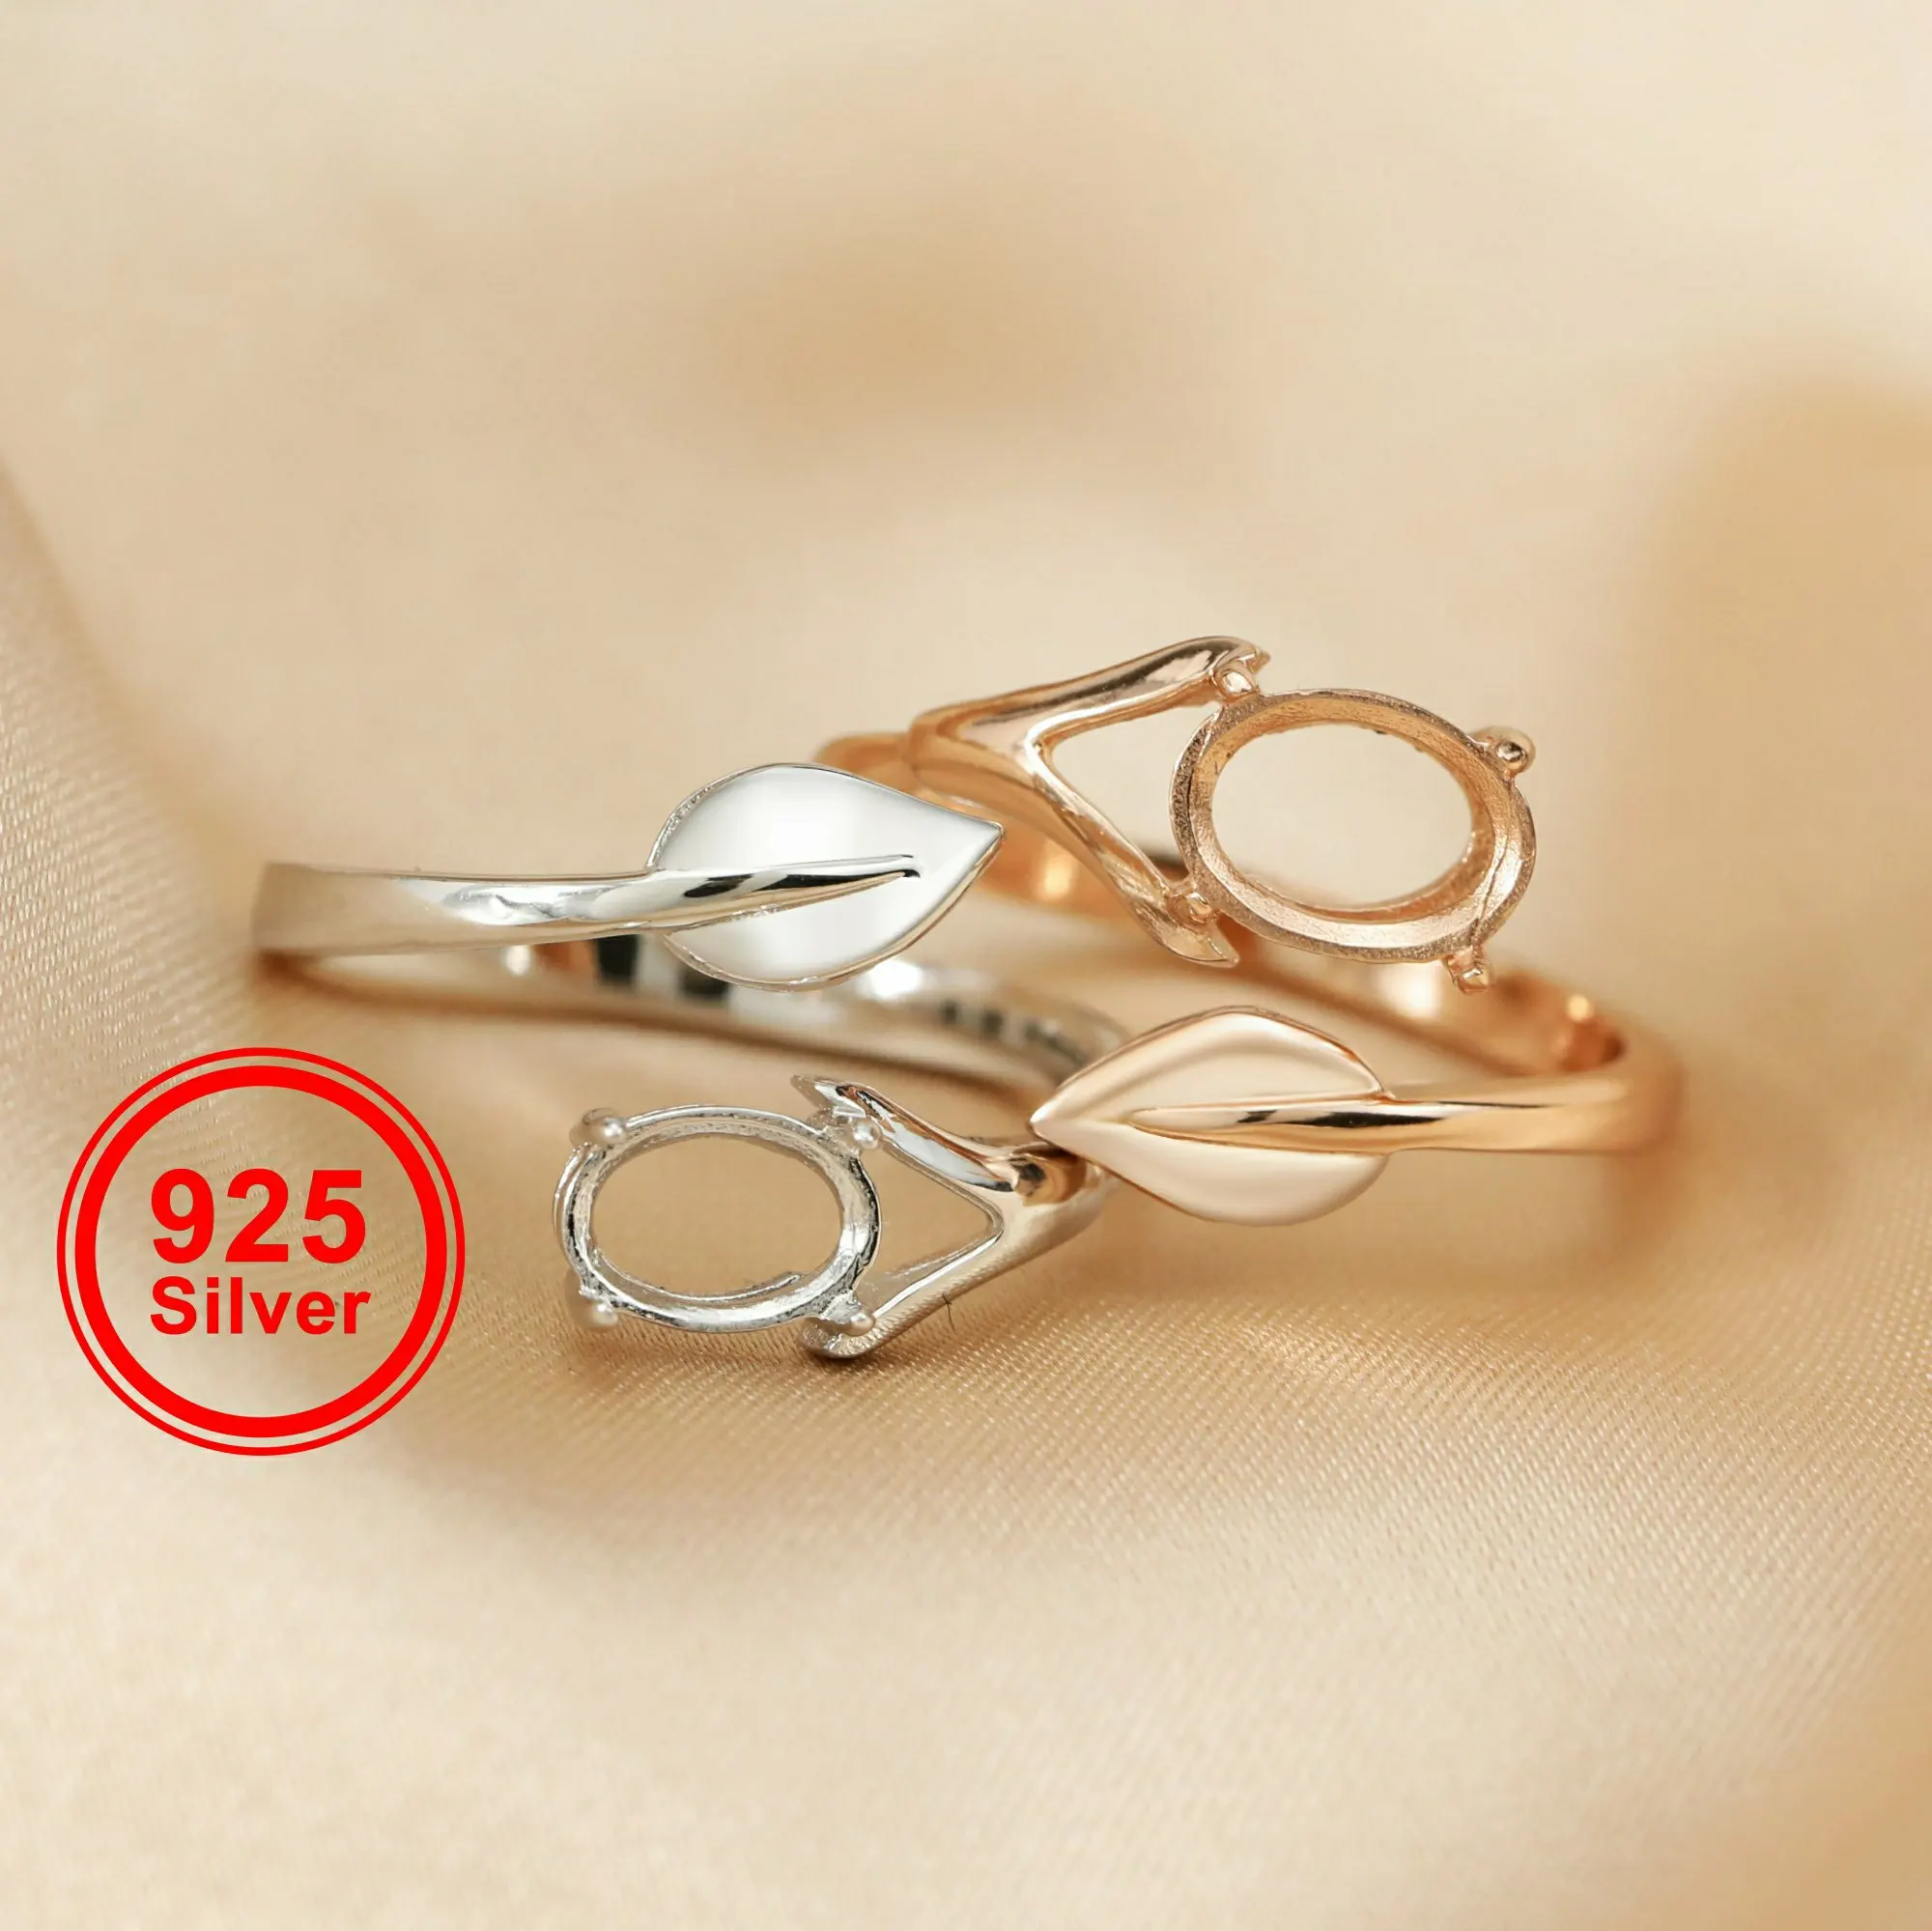 Oval Prong Ring Blank Settings Flower Leaf Bezel Solid 925 Sterling Silver Rose Gold Plated Adjustable Ring Band 1224111